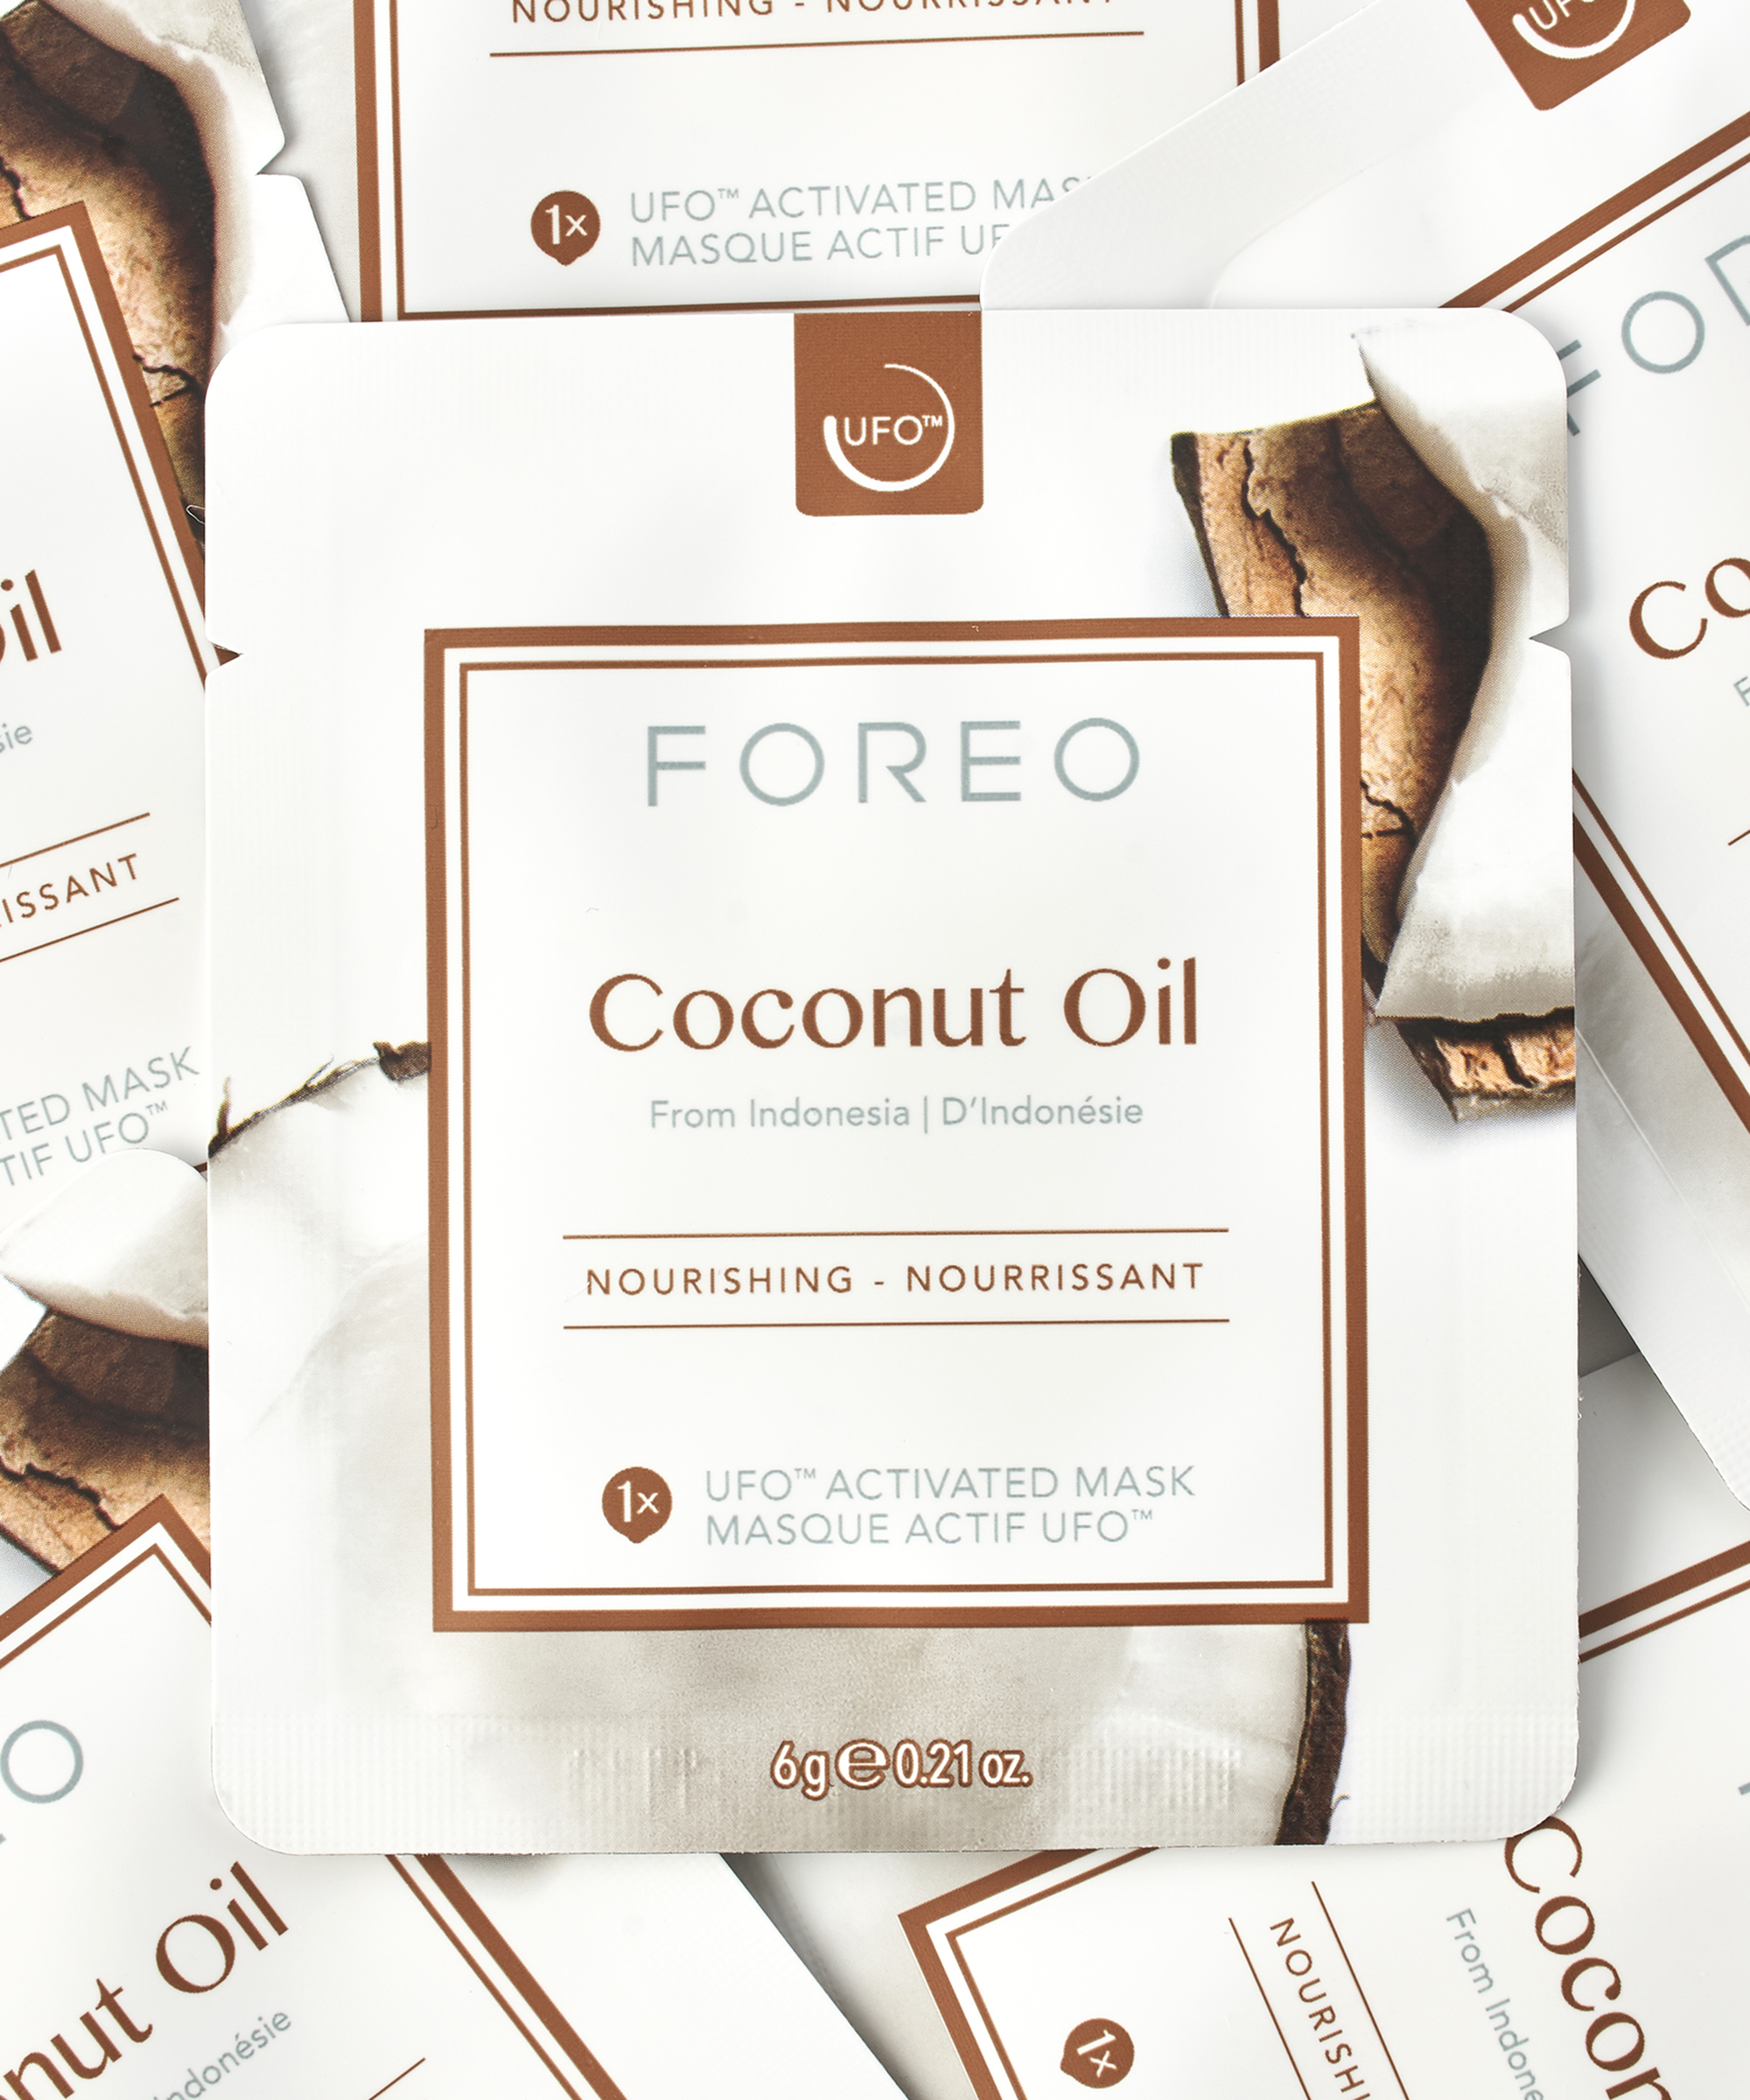 Dry Face BEAUTY Coconut Nourishing Oil UFO/UFO Foreo Skin at mini BAY Mask for